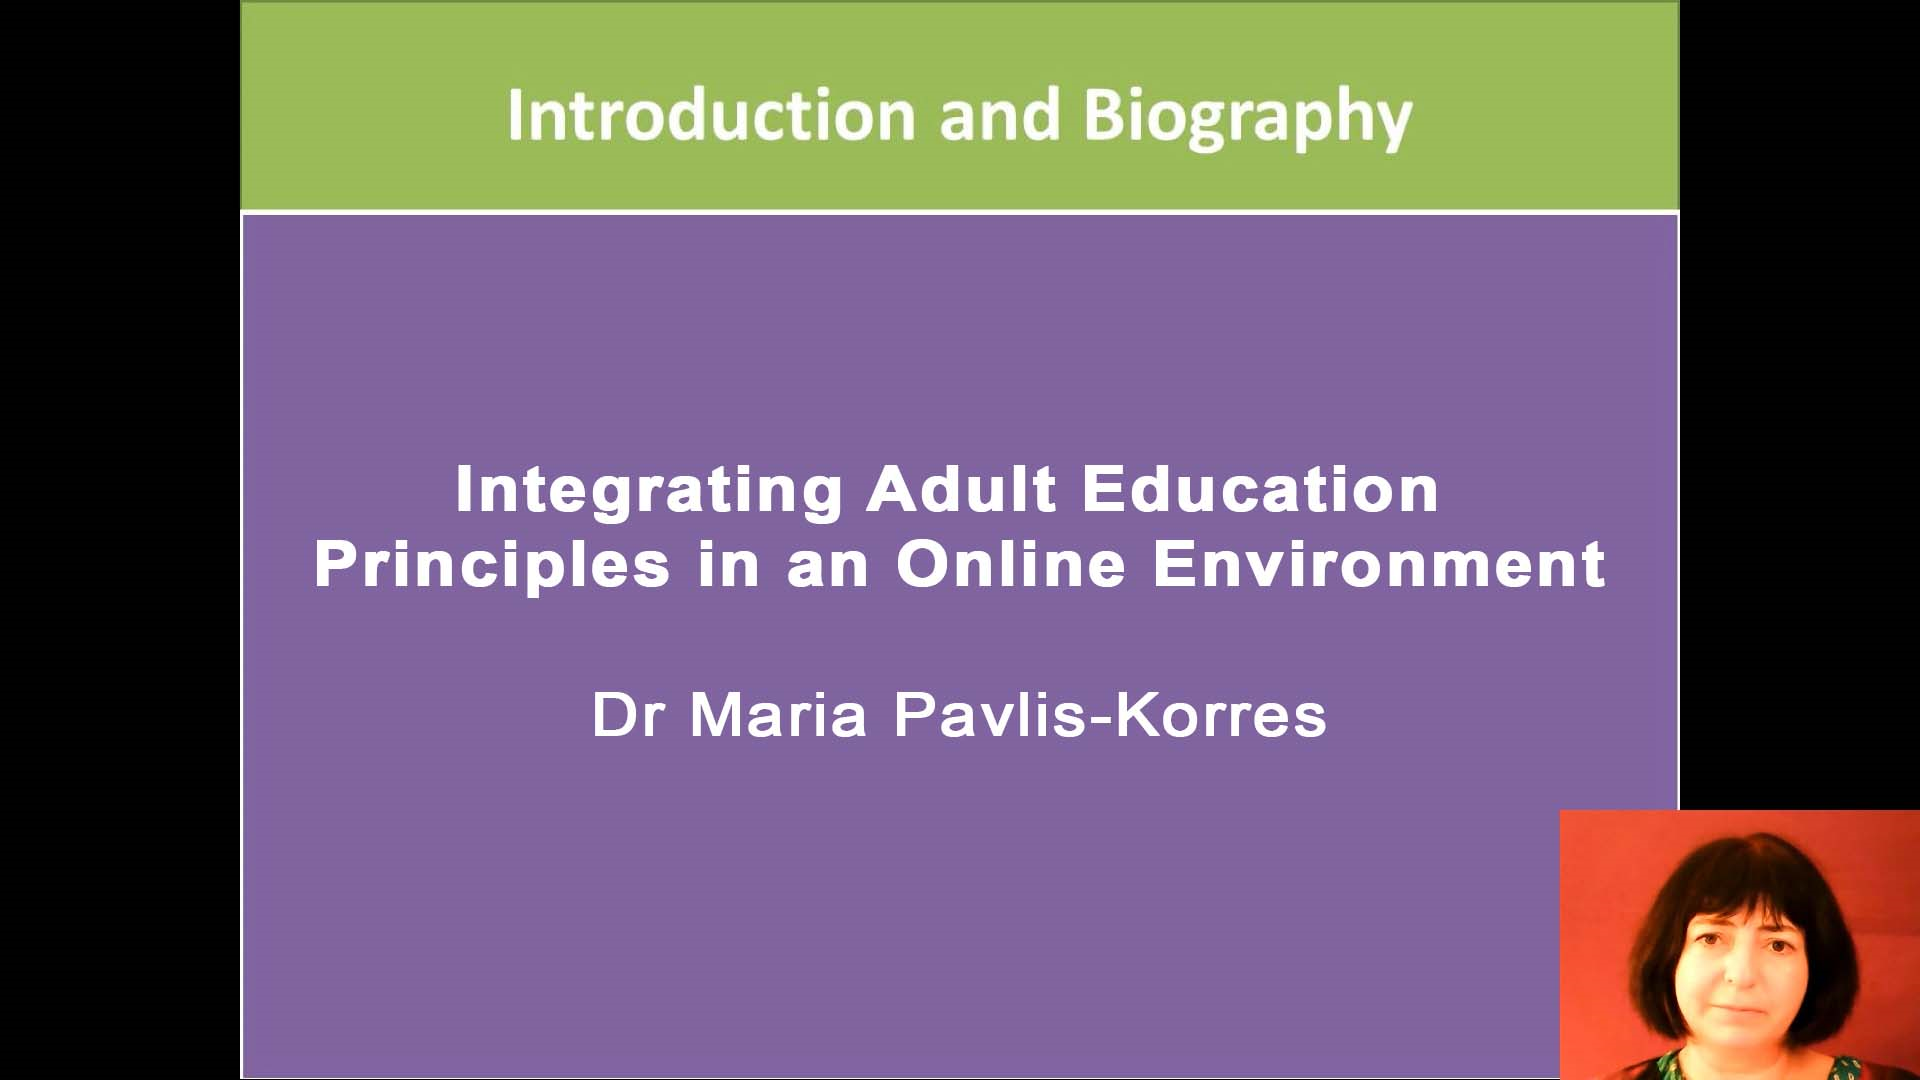 Integrating Adult Education Principles in an Online Environment